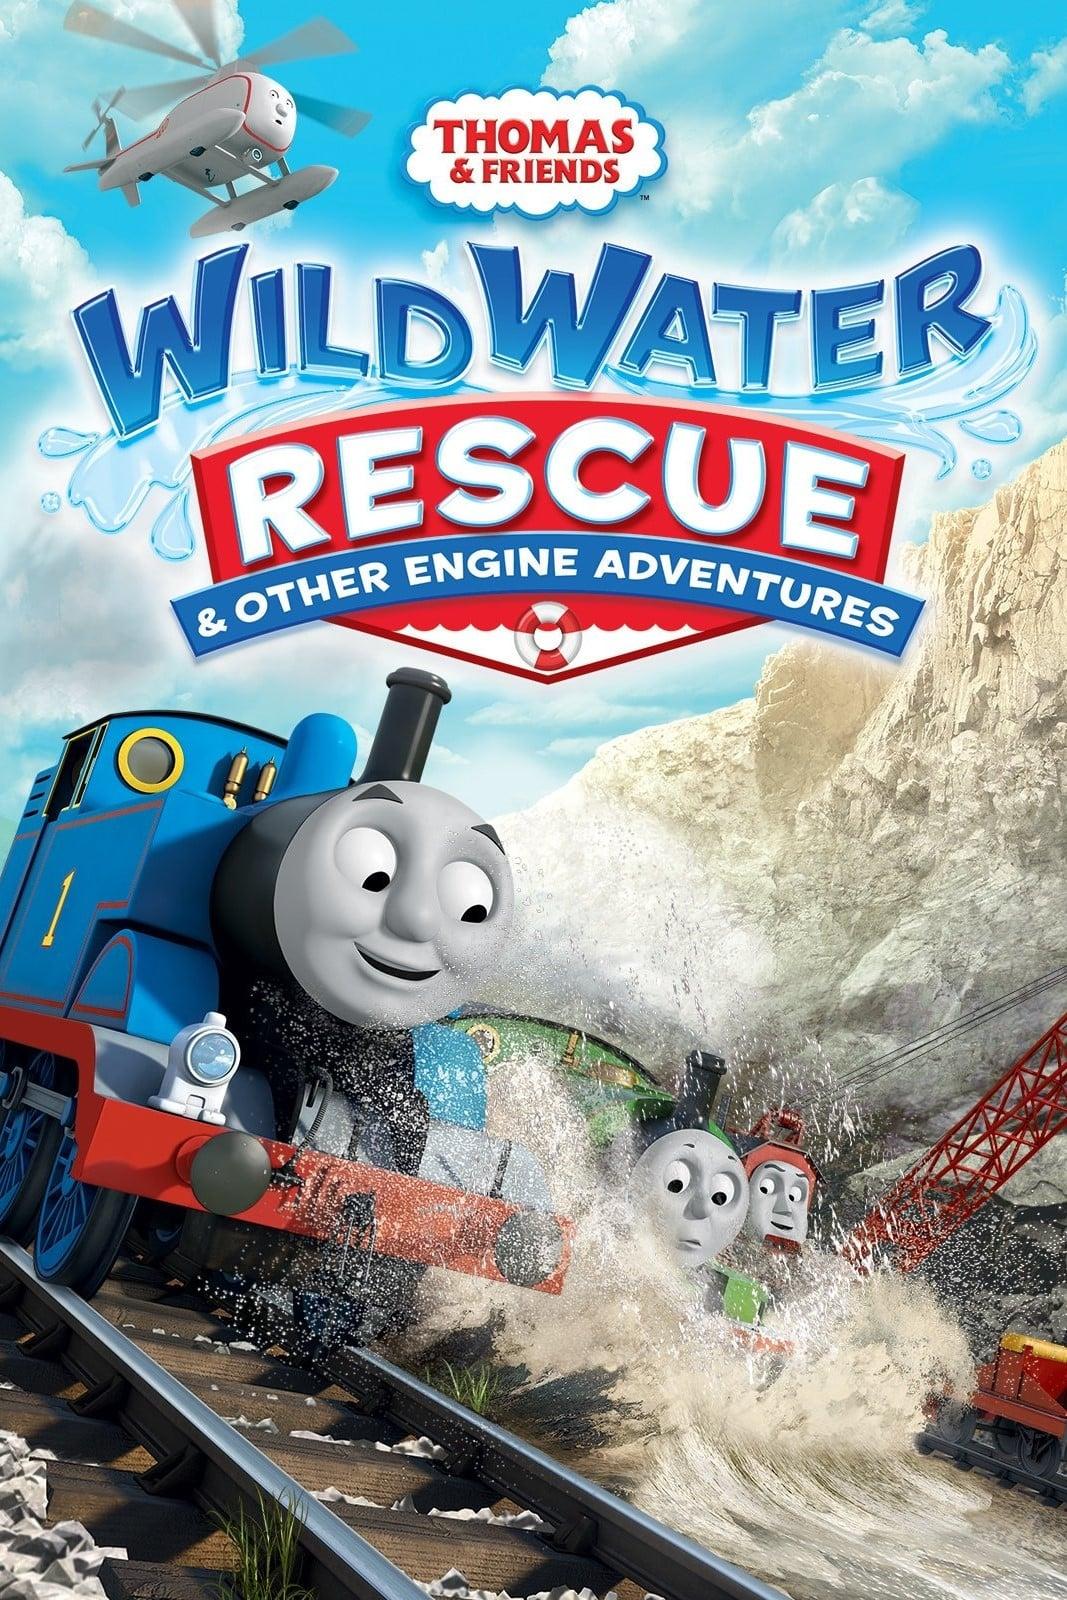 Thomas & Friends: Wild Water Rescue & Other Engine Adventures poster